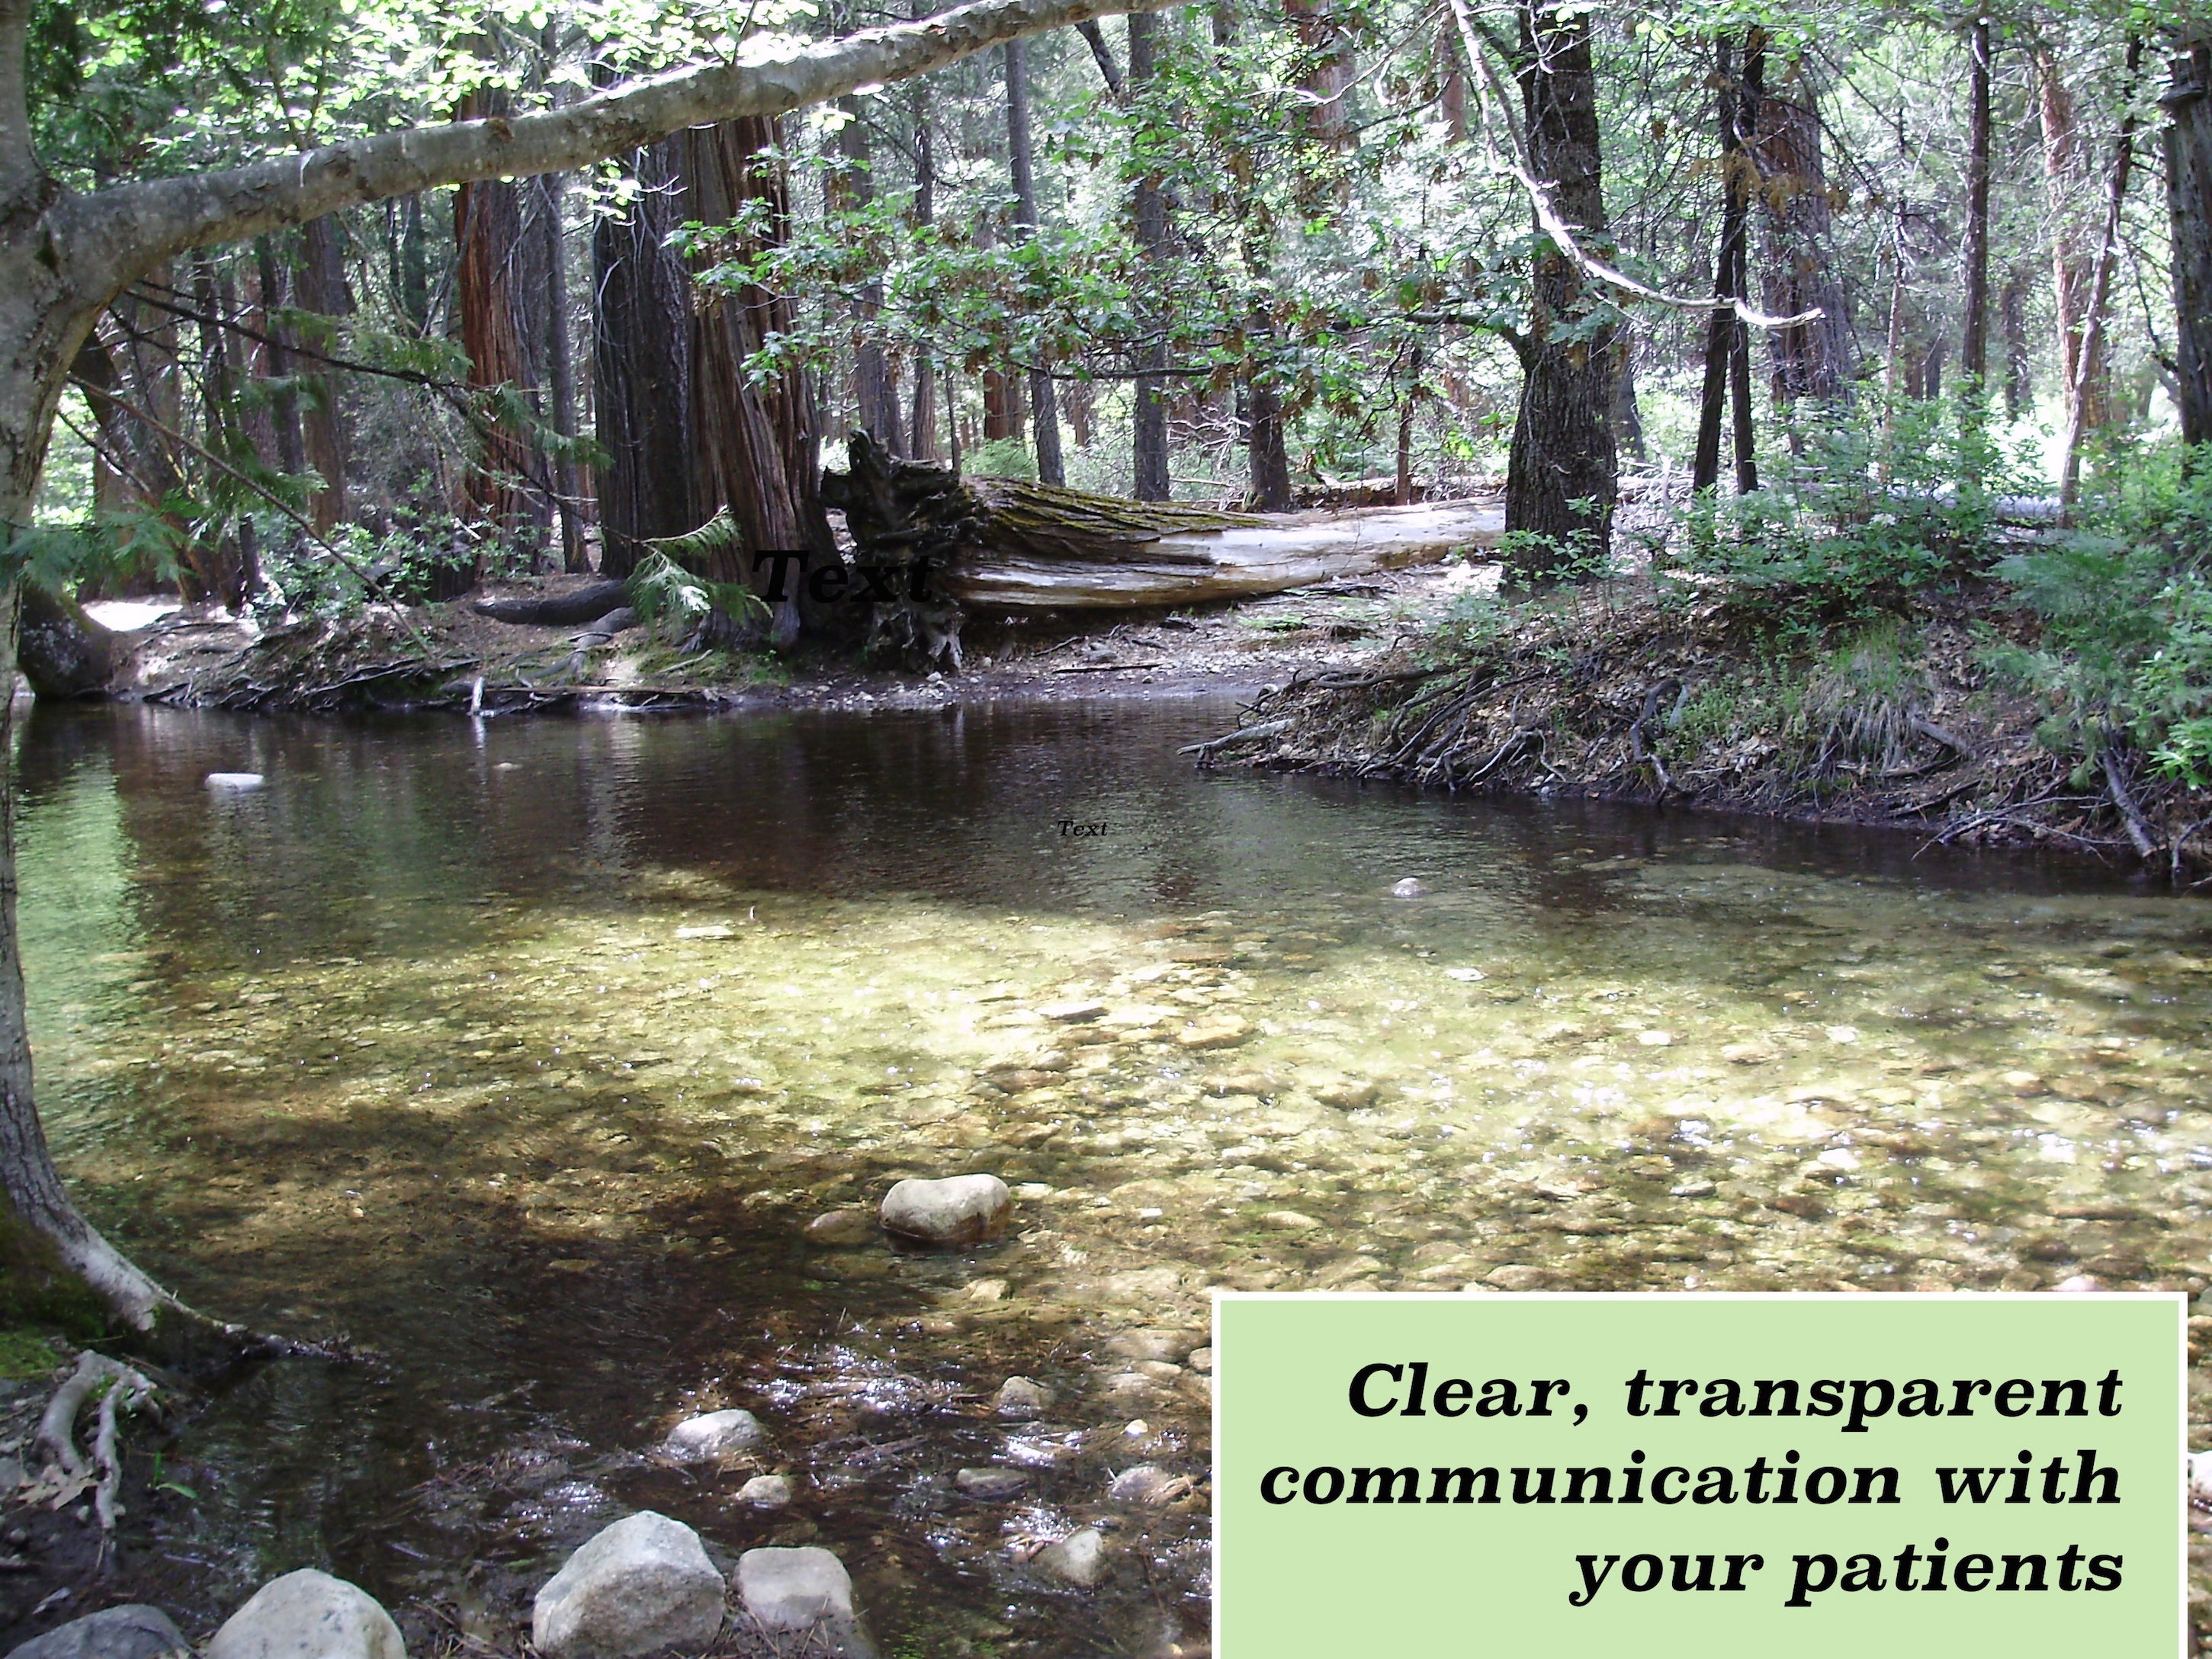 Clear, transparent communication with your patients